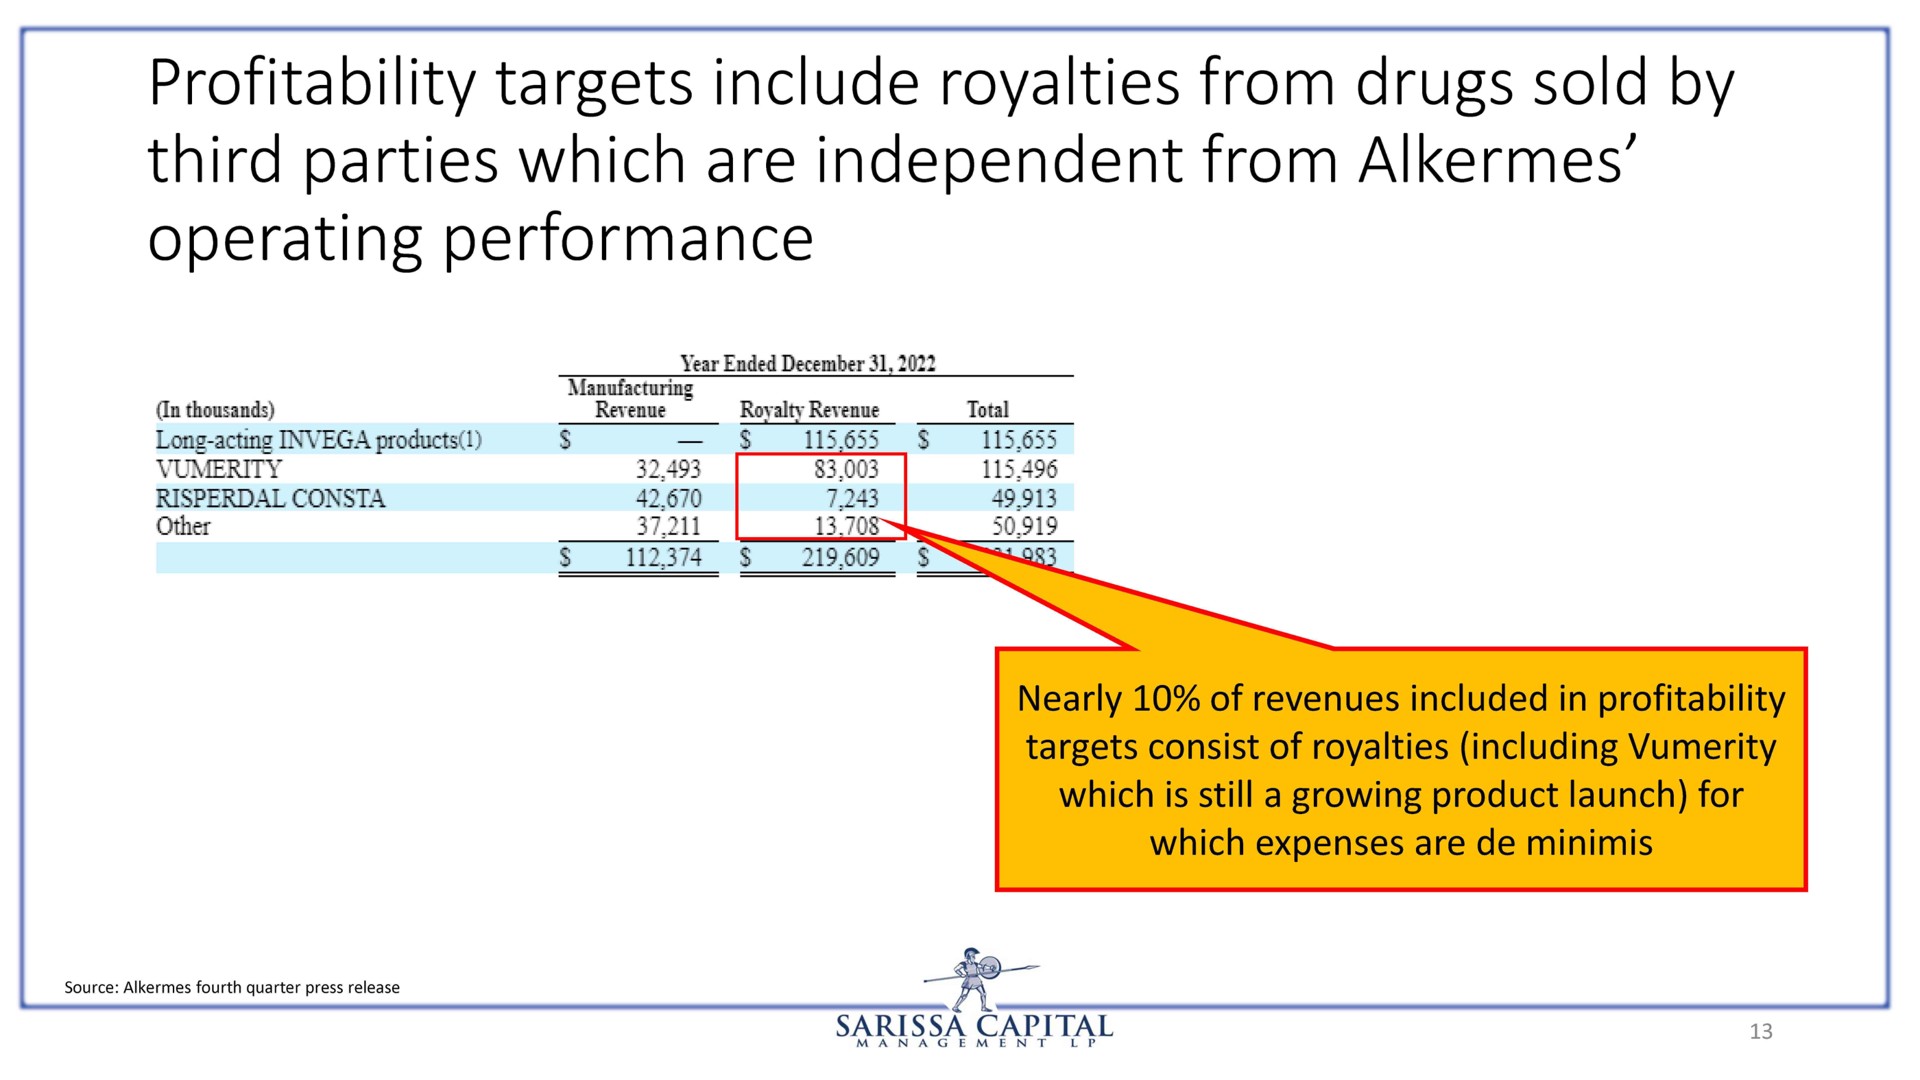 profitability targets include royalties from drugs sold by third parties which are independent from alkermes operating performance | Sarissa Capital